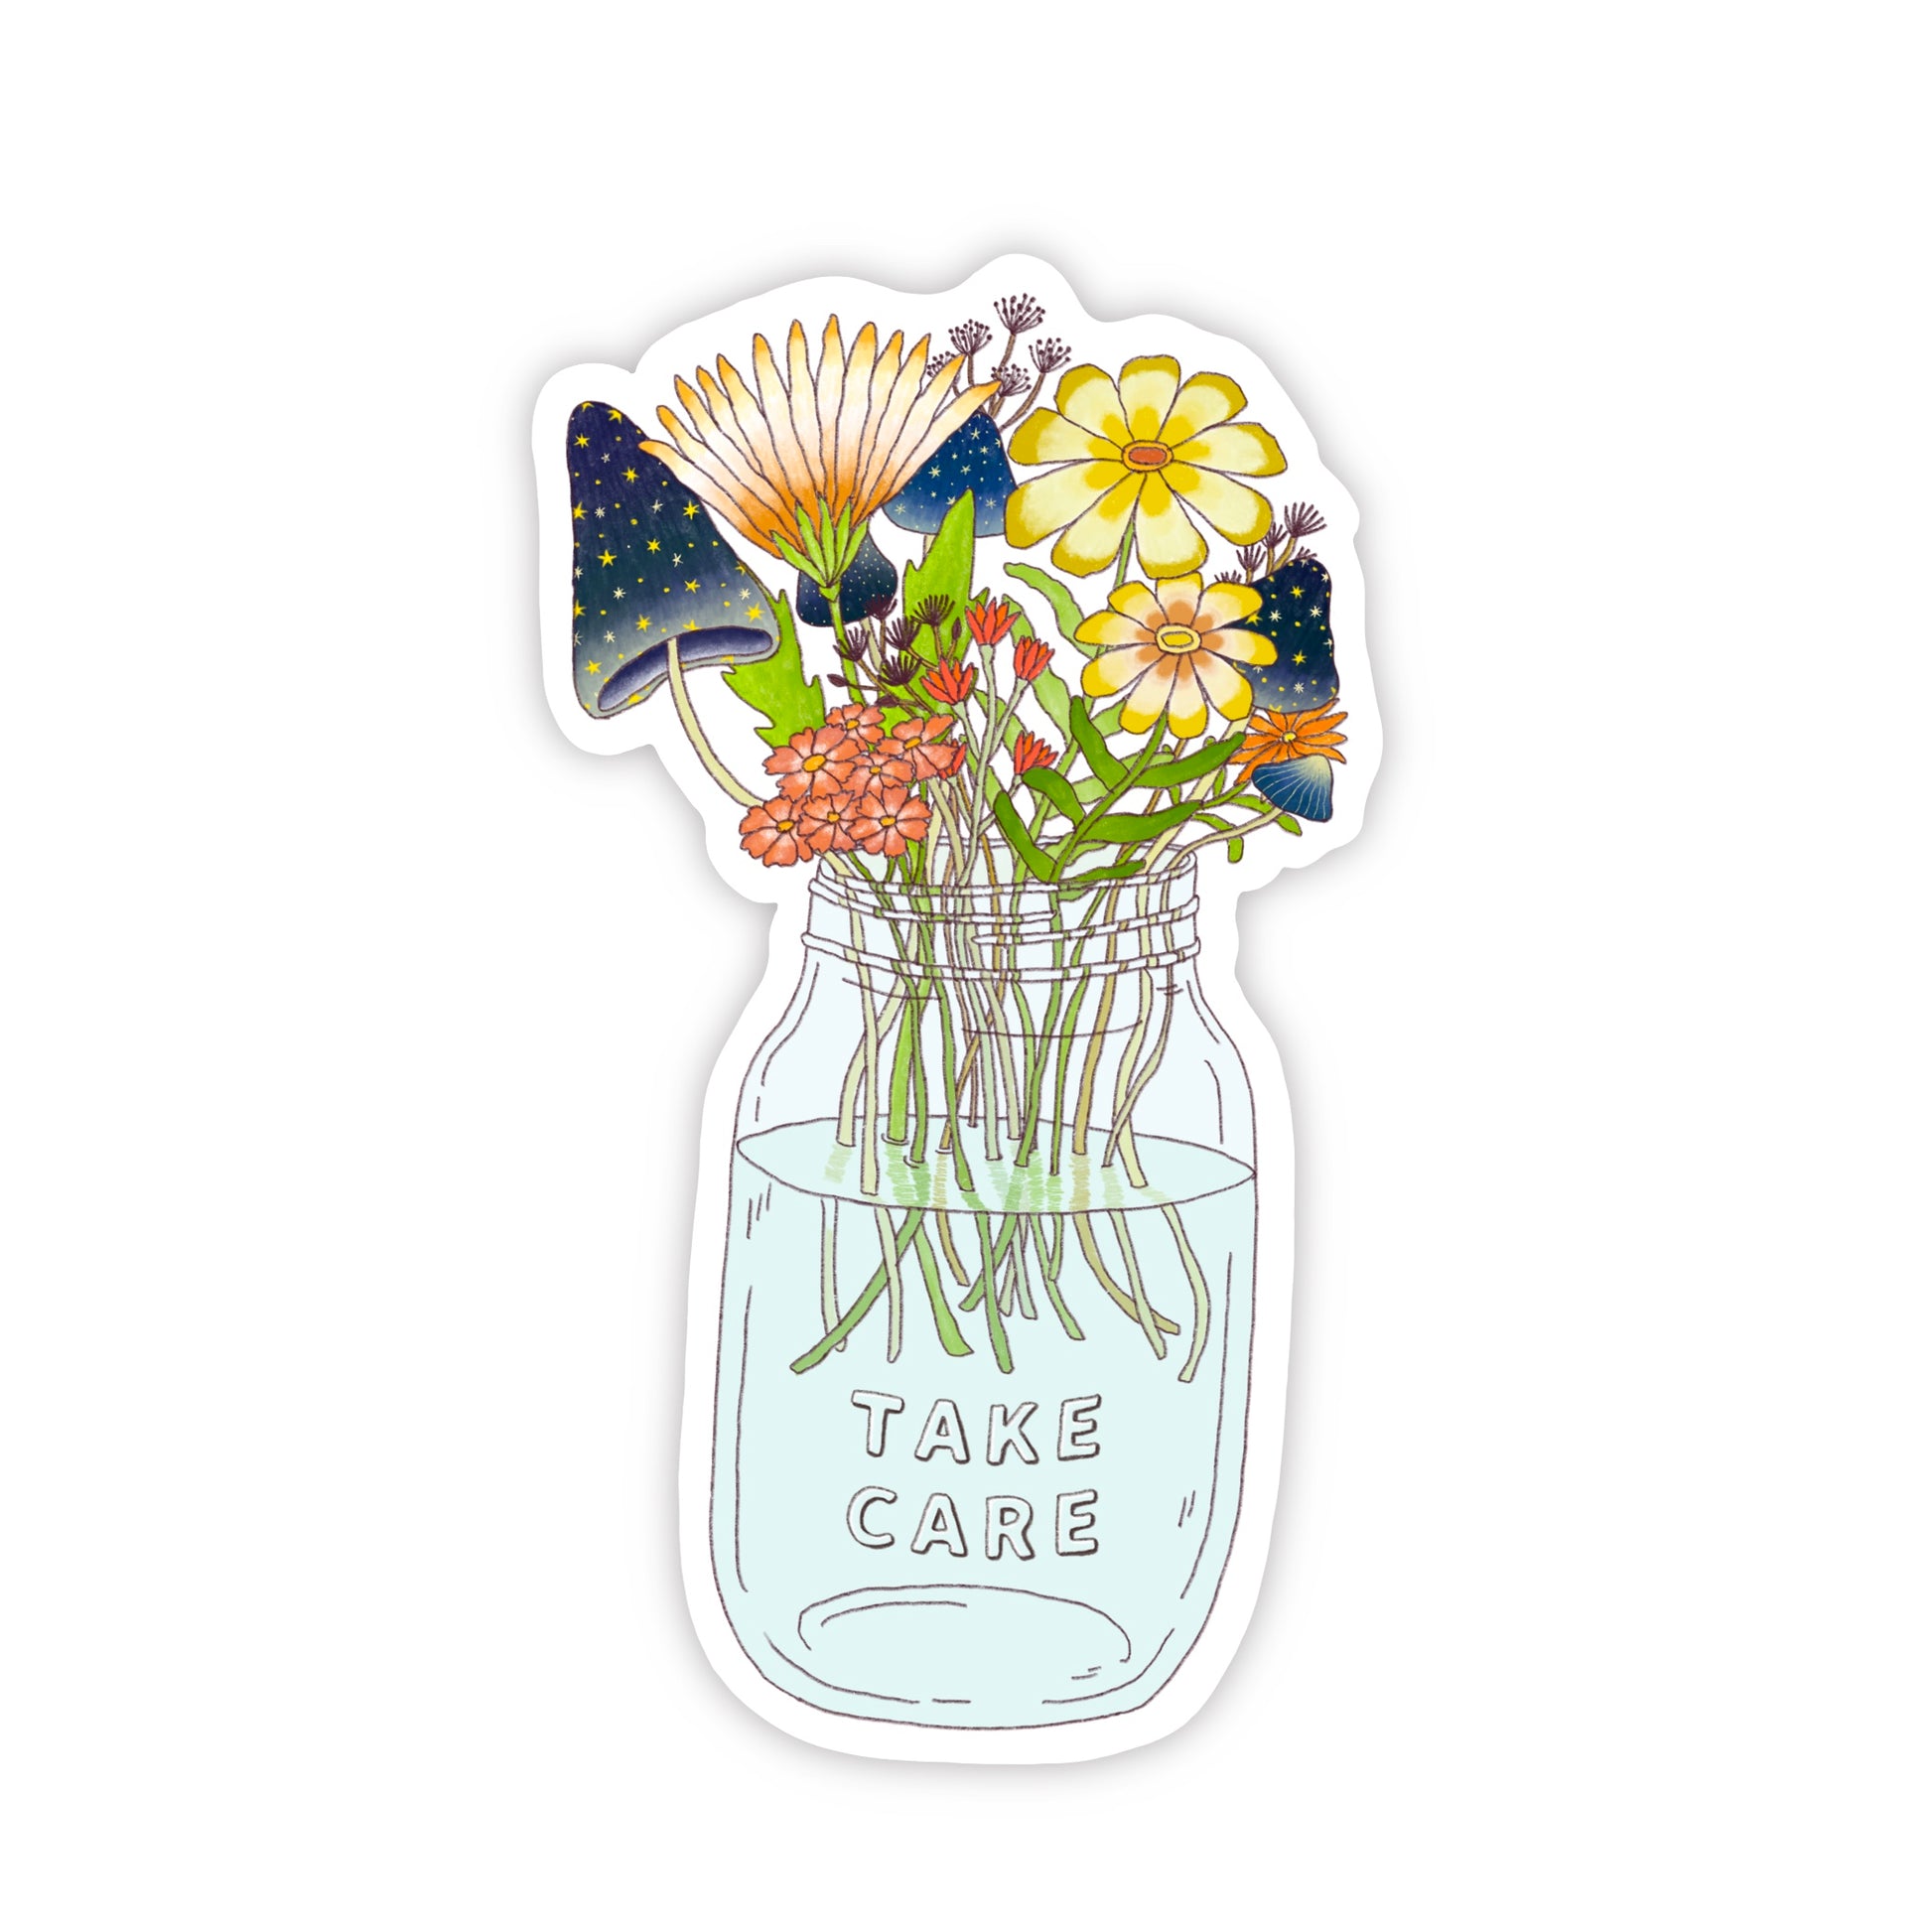 Inspiring weatherproof sticker with flowers and starry mushrooms a mason jar that says “Take Care” 